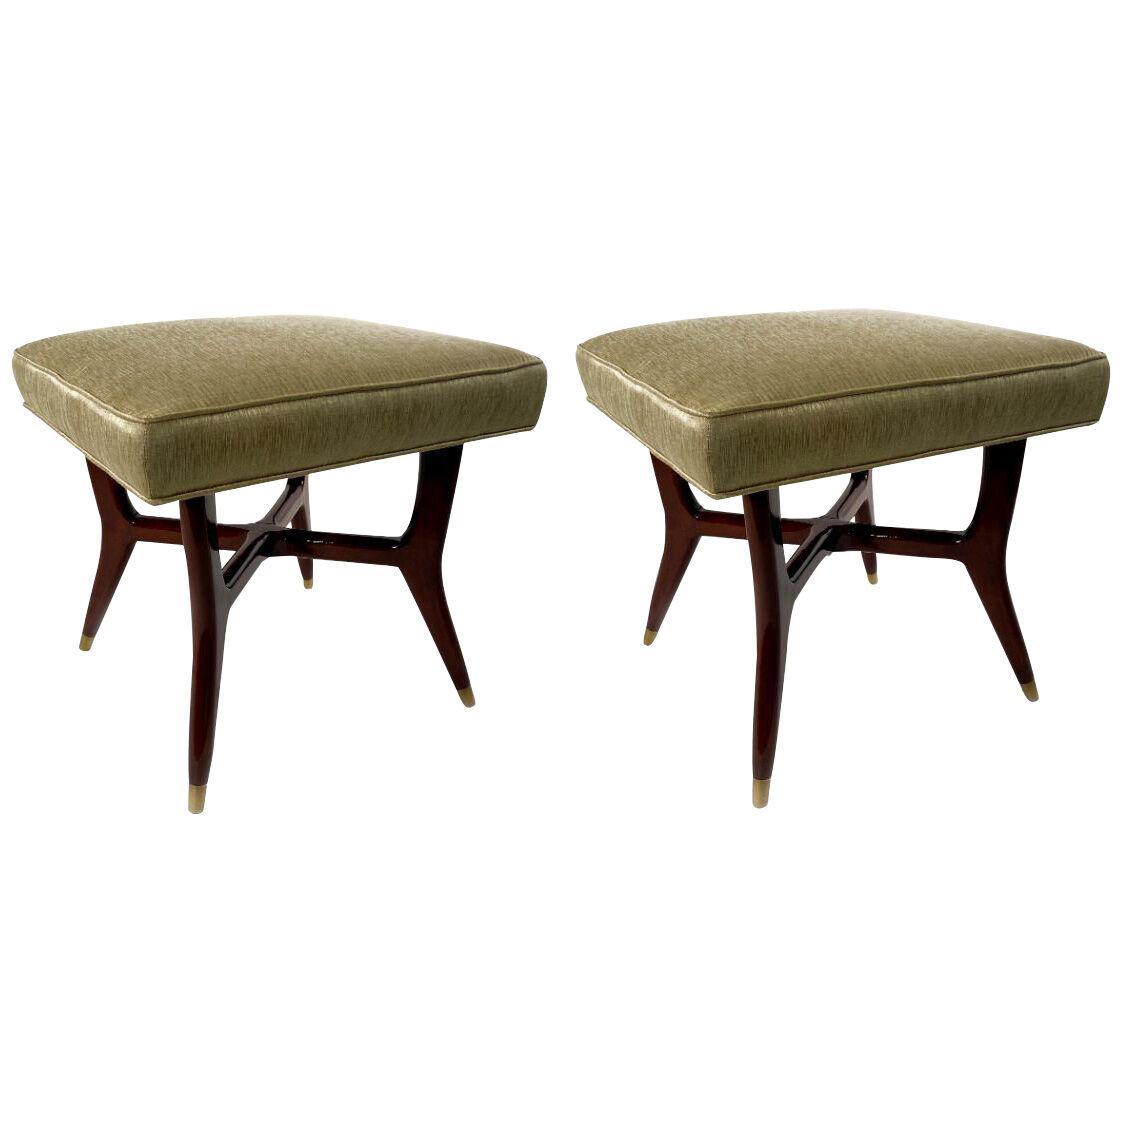 Pair Italian Modern mahogany and Brass Ottomans/Benches/Taboret, Attr. Gio Ponti